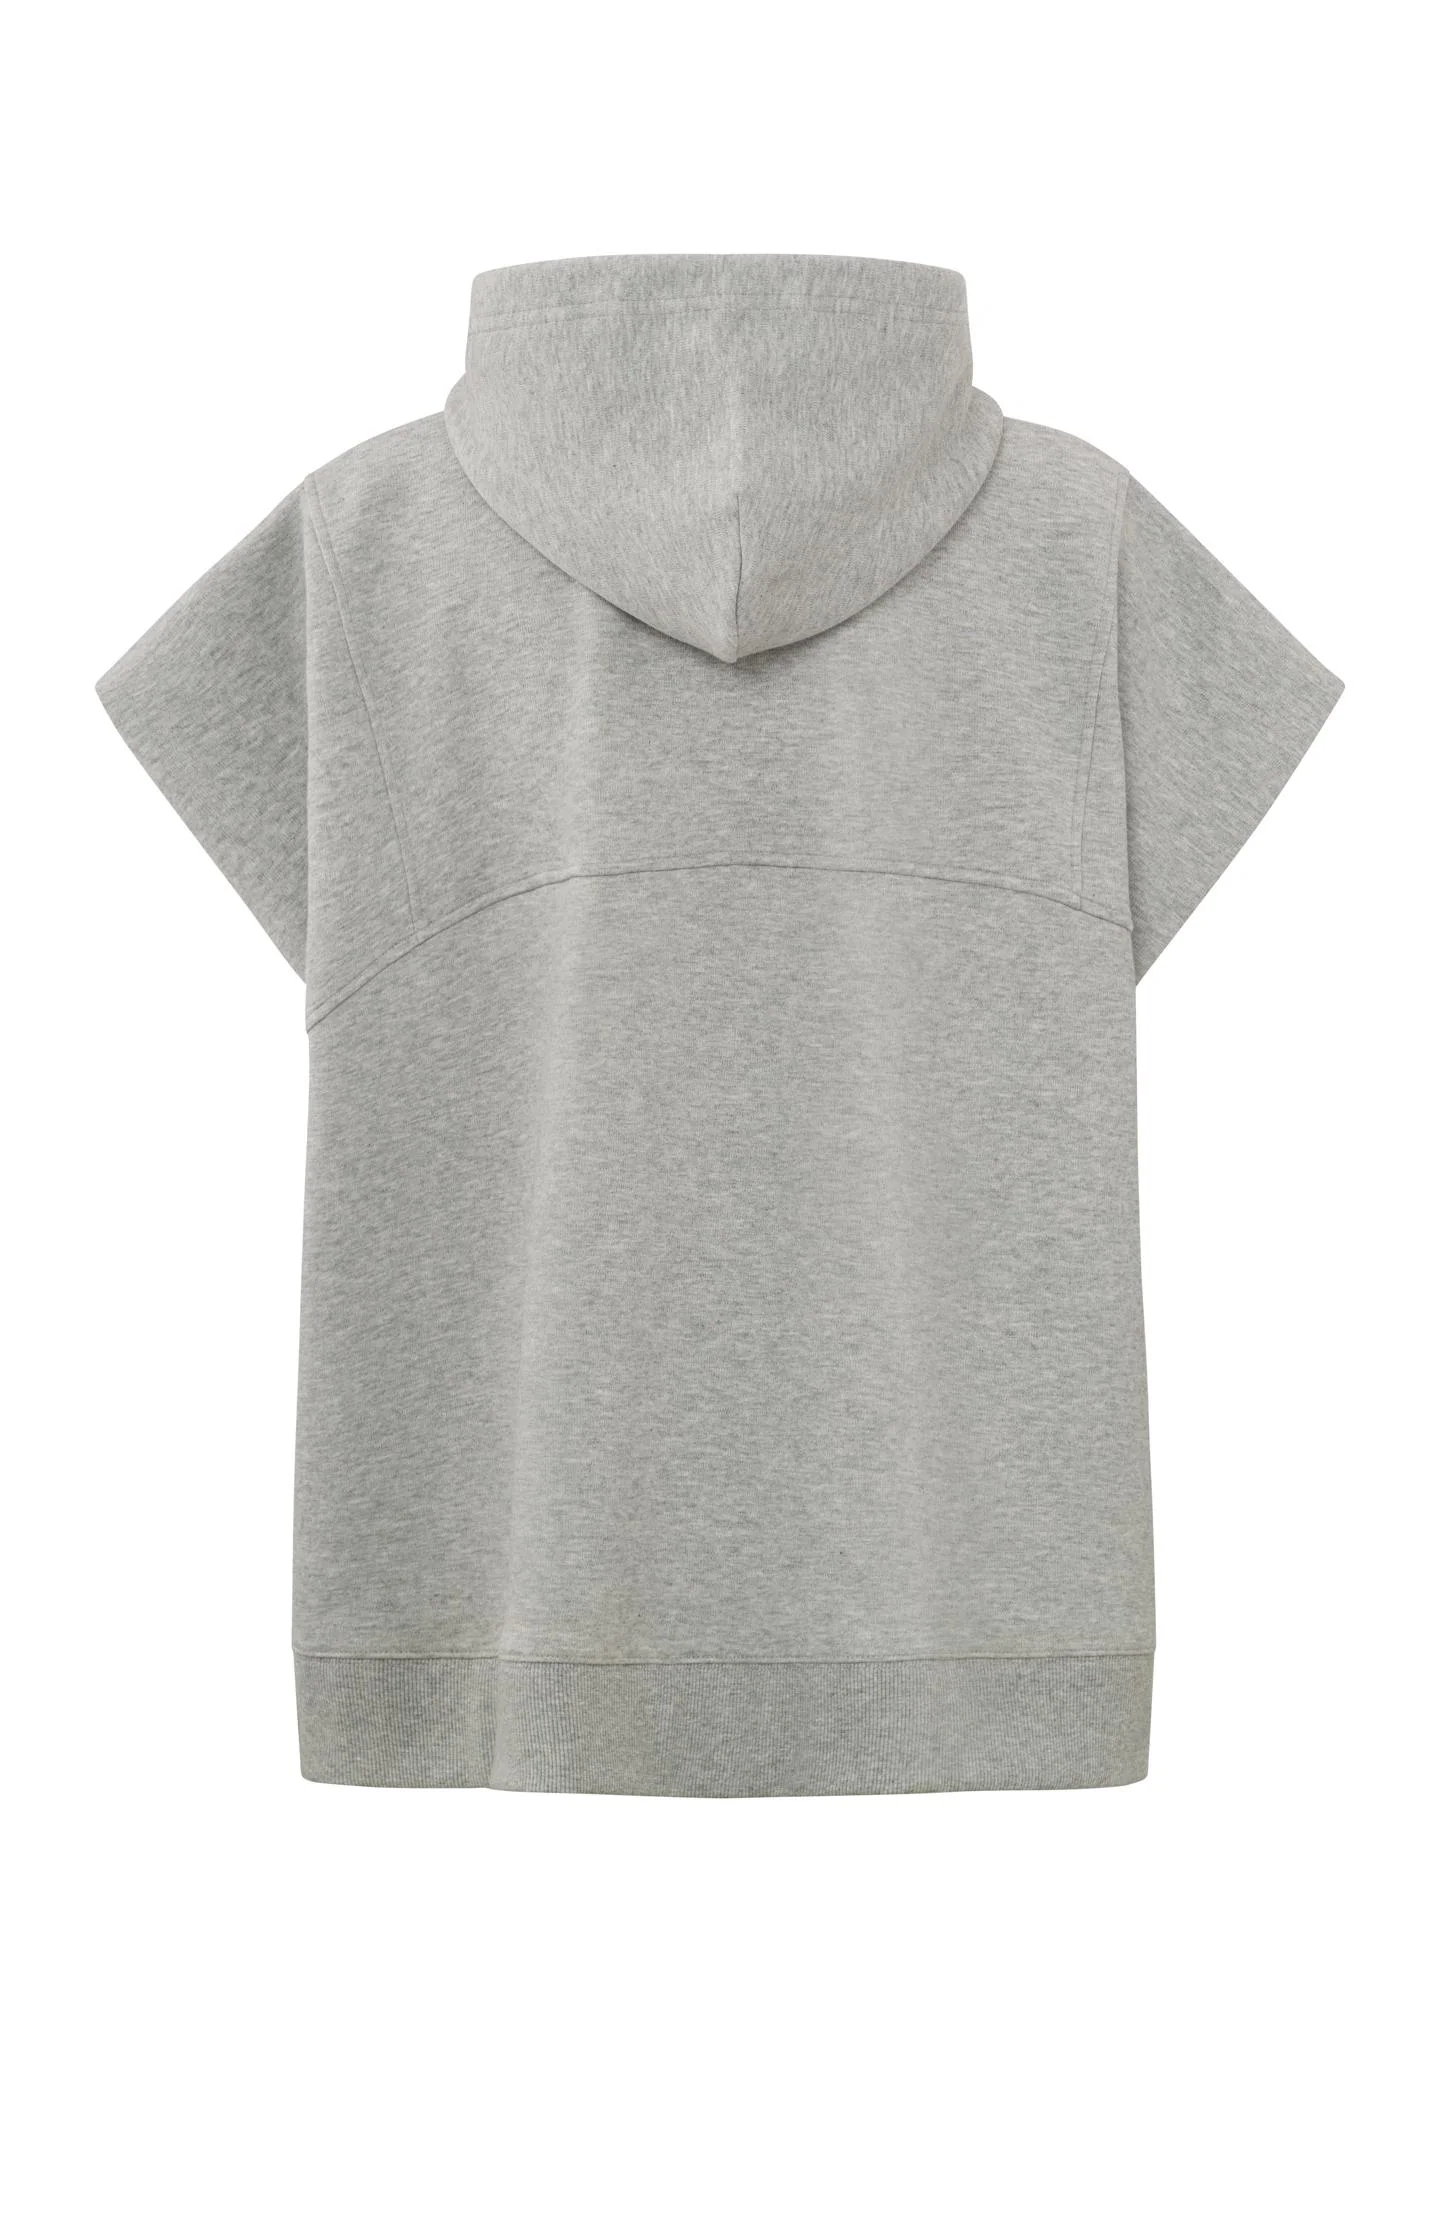 sleeveless-hoodie-with-pockets-and-drawstring-in-wide-fit-grey-melange_d13ad81f-fbf8-4c85-ad4e-978df5ced2ed_1440x